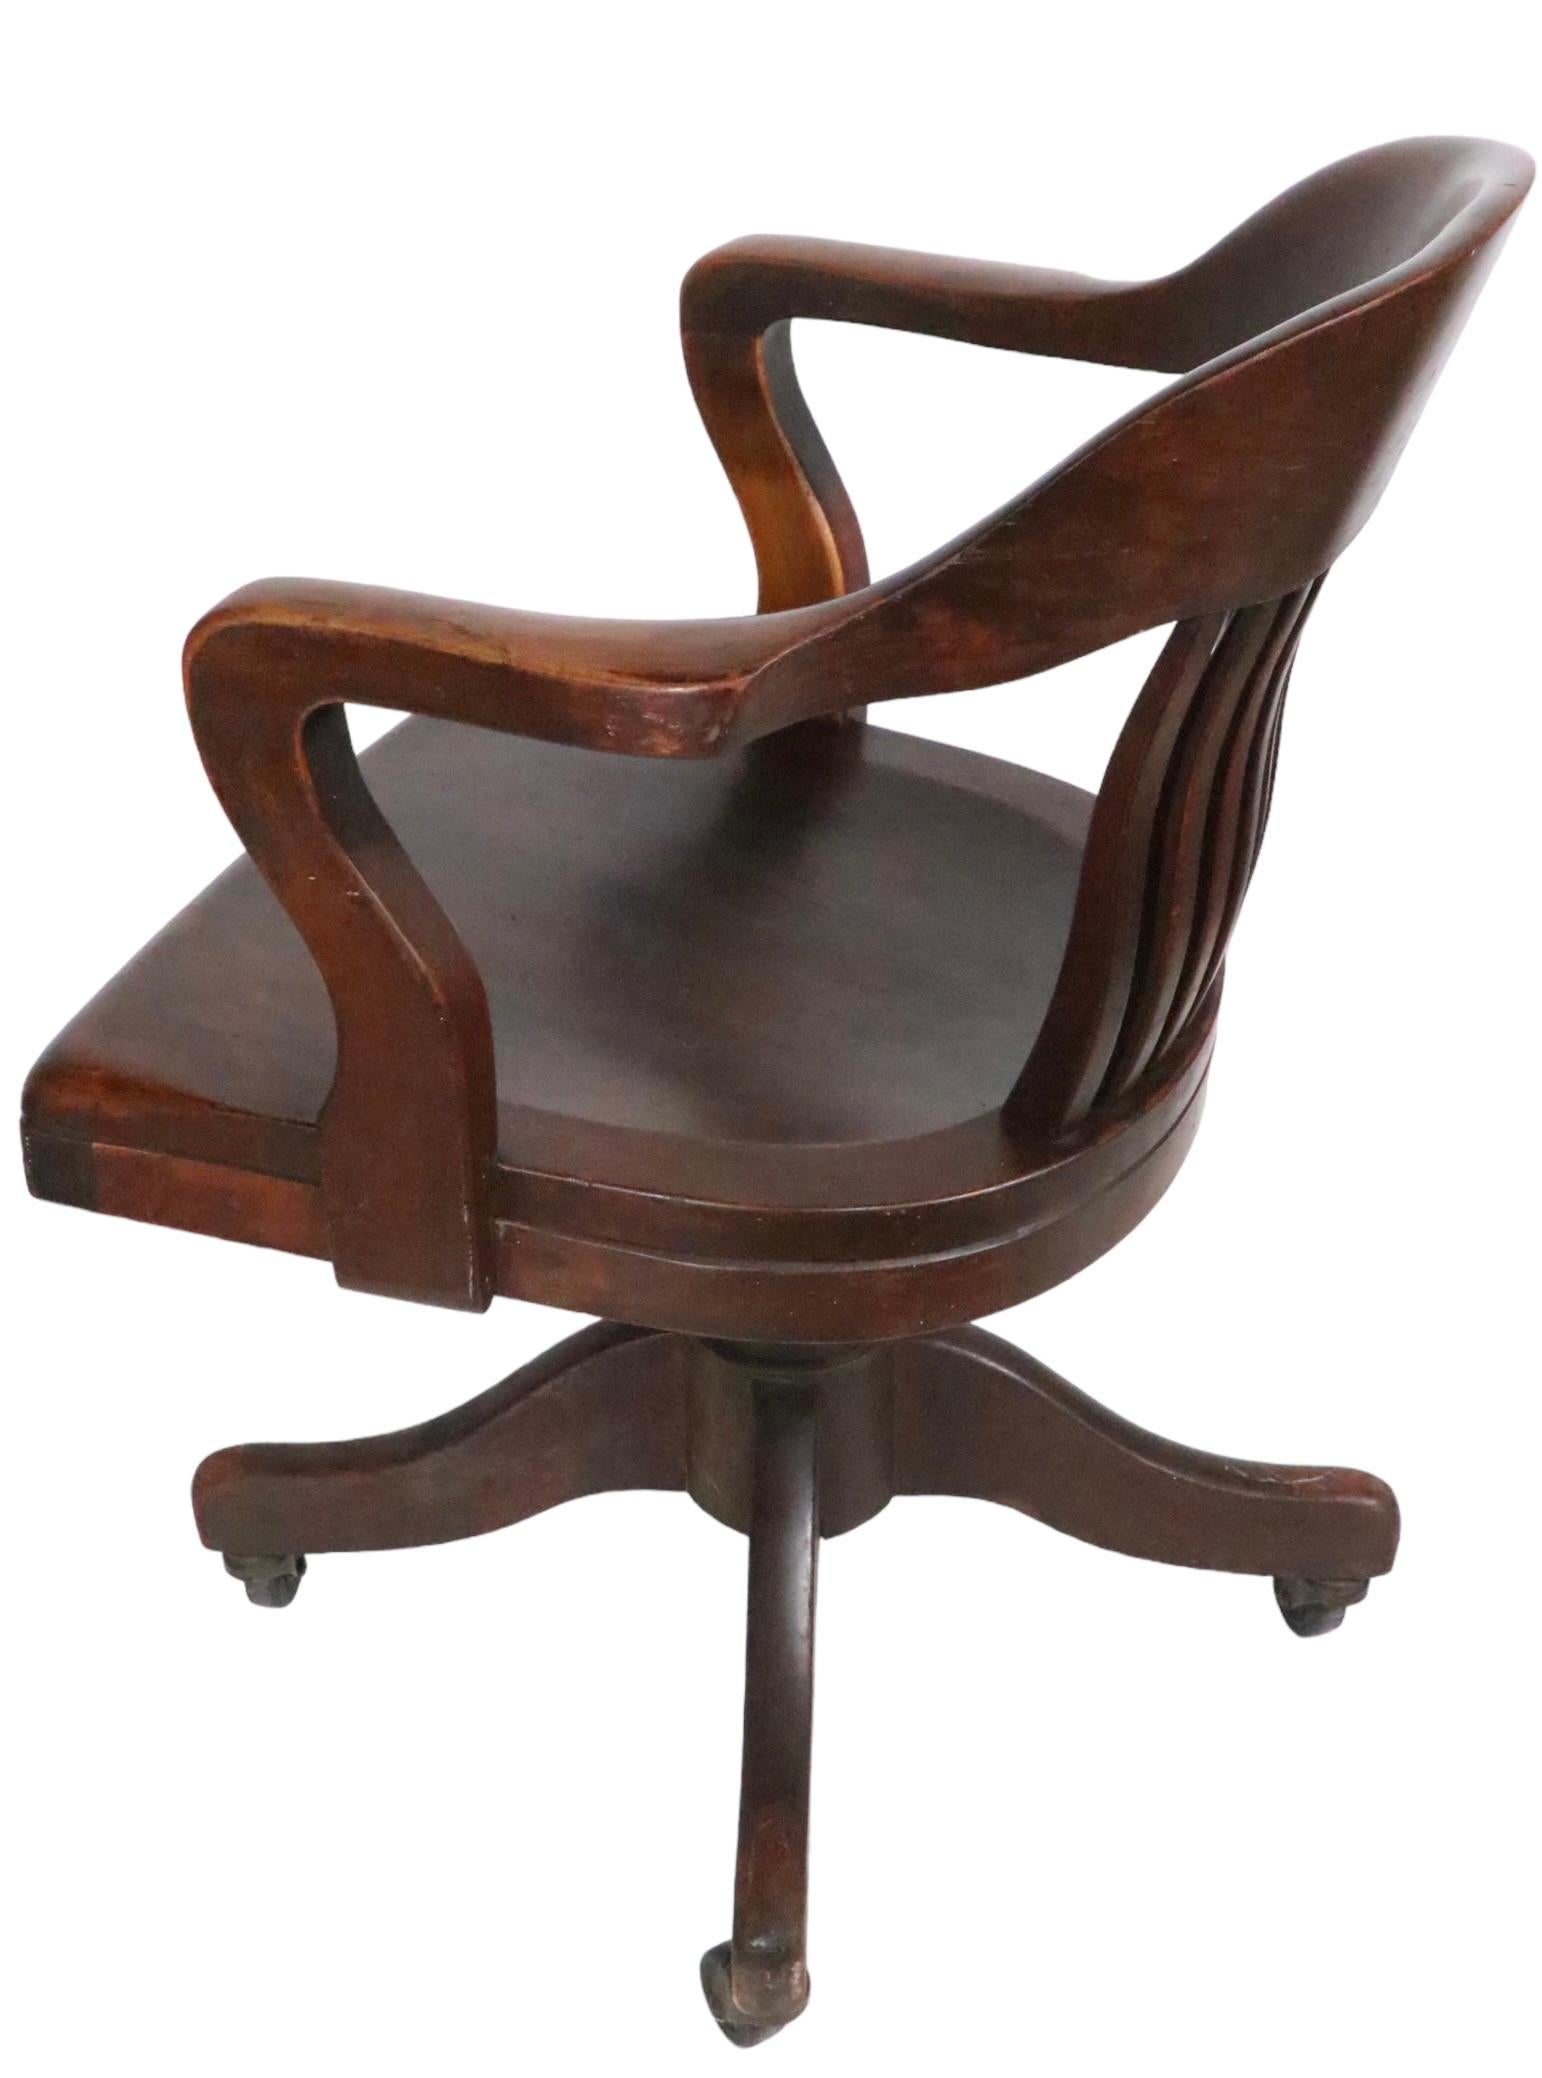 Bank of England Jury Style Swivel Desk Chair by Marble Chair Company c 1920/1930 1